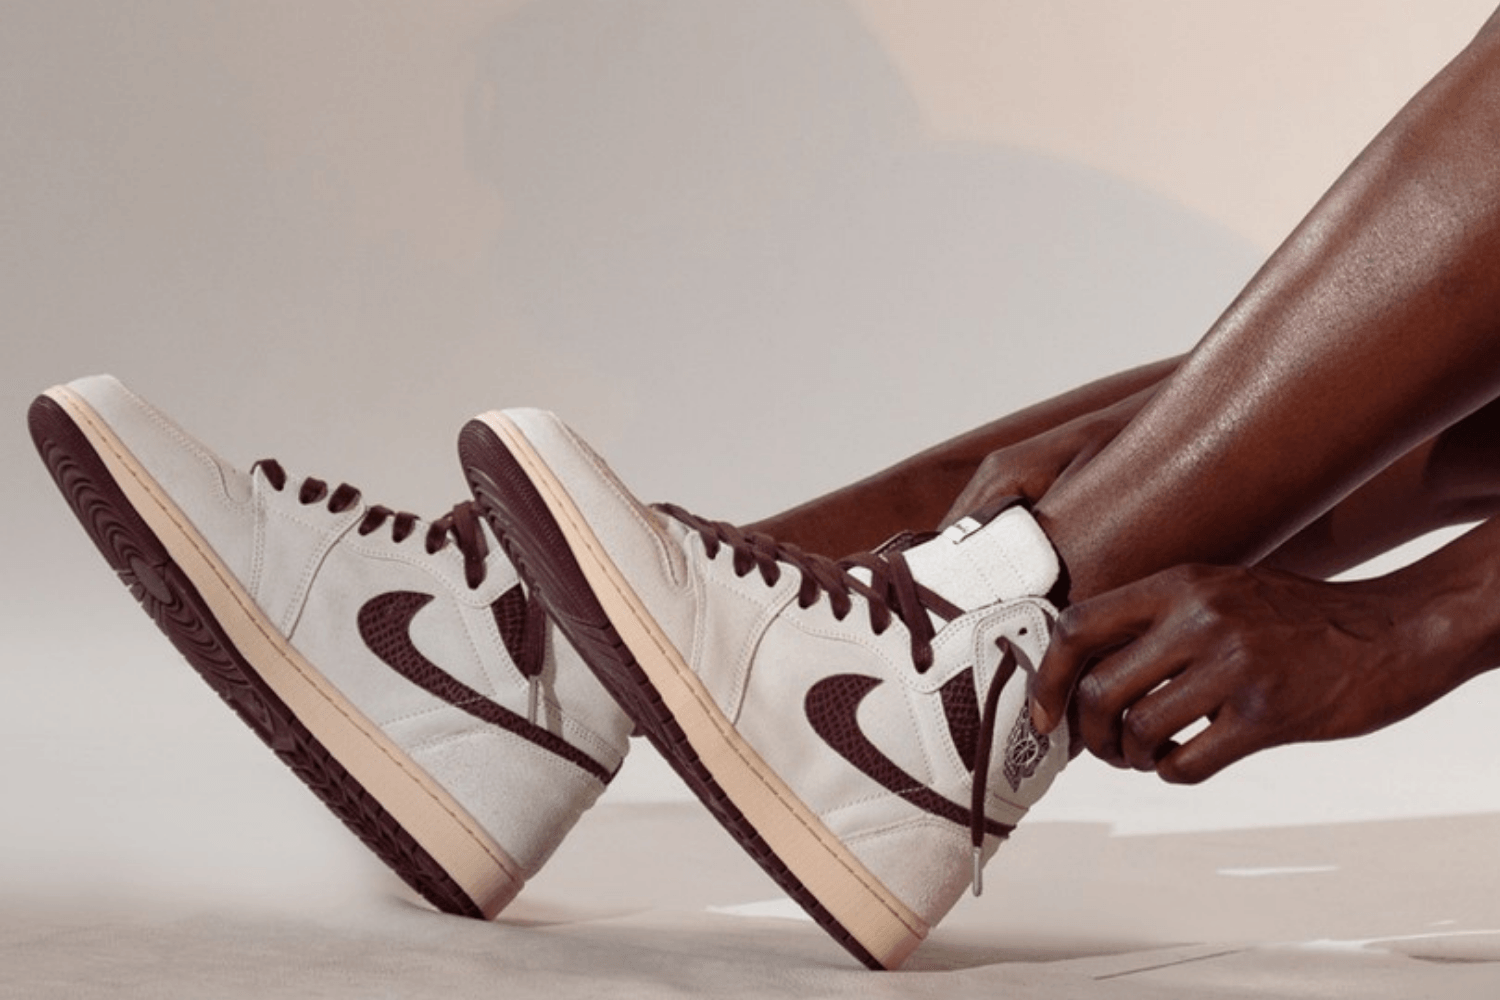 The A Ma Maniére x Air Jordan 1 comes with a big release